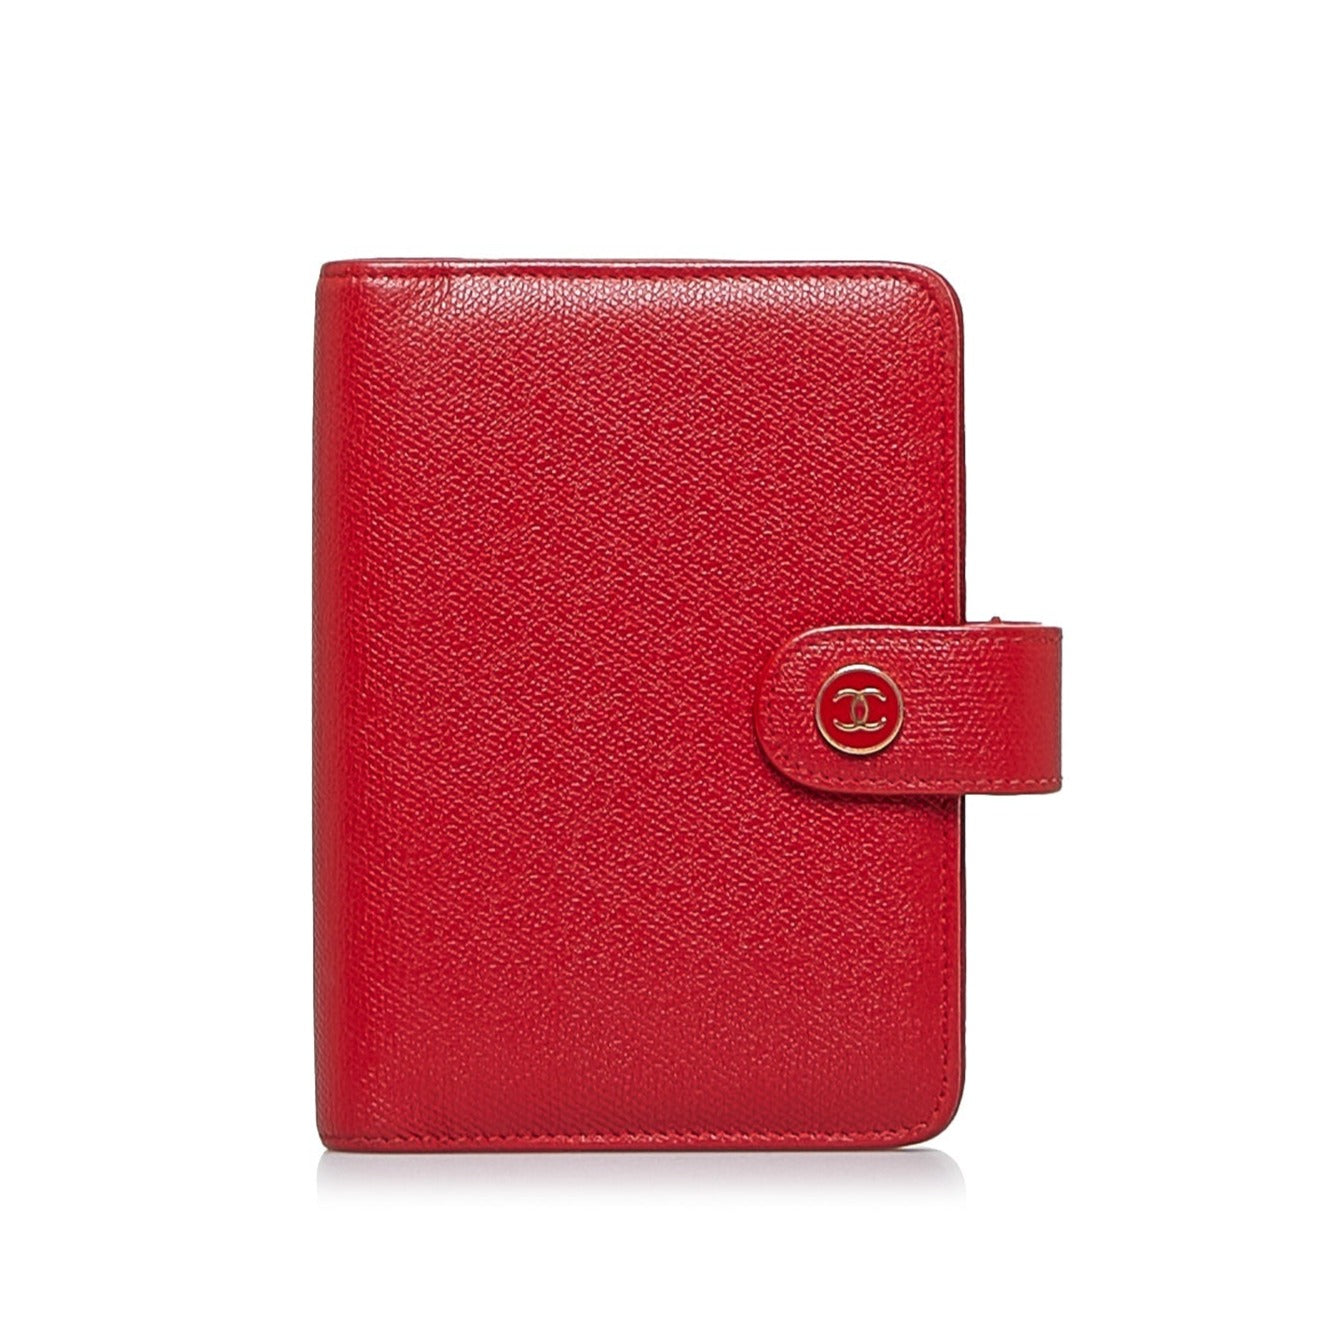 CHANEL Chanel CC Notebook/Agenda Cover Red - Vault 55